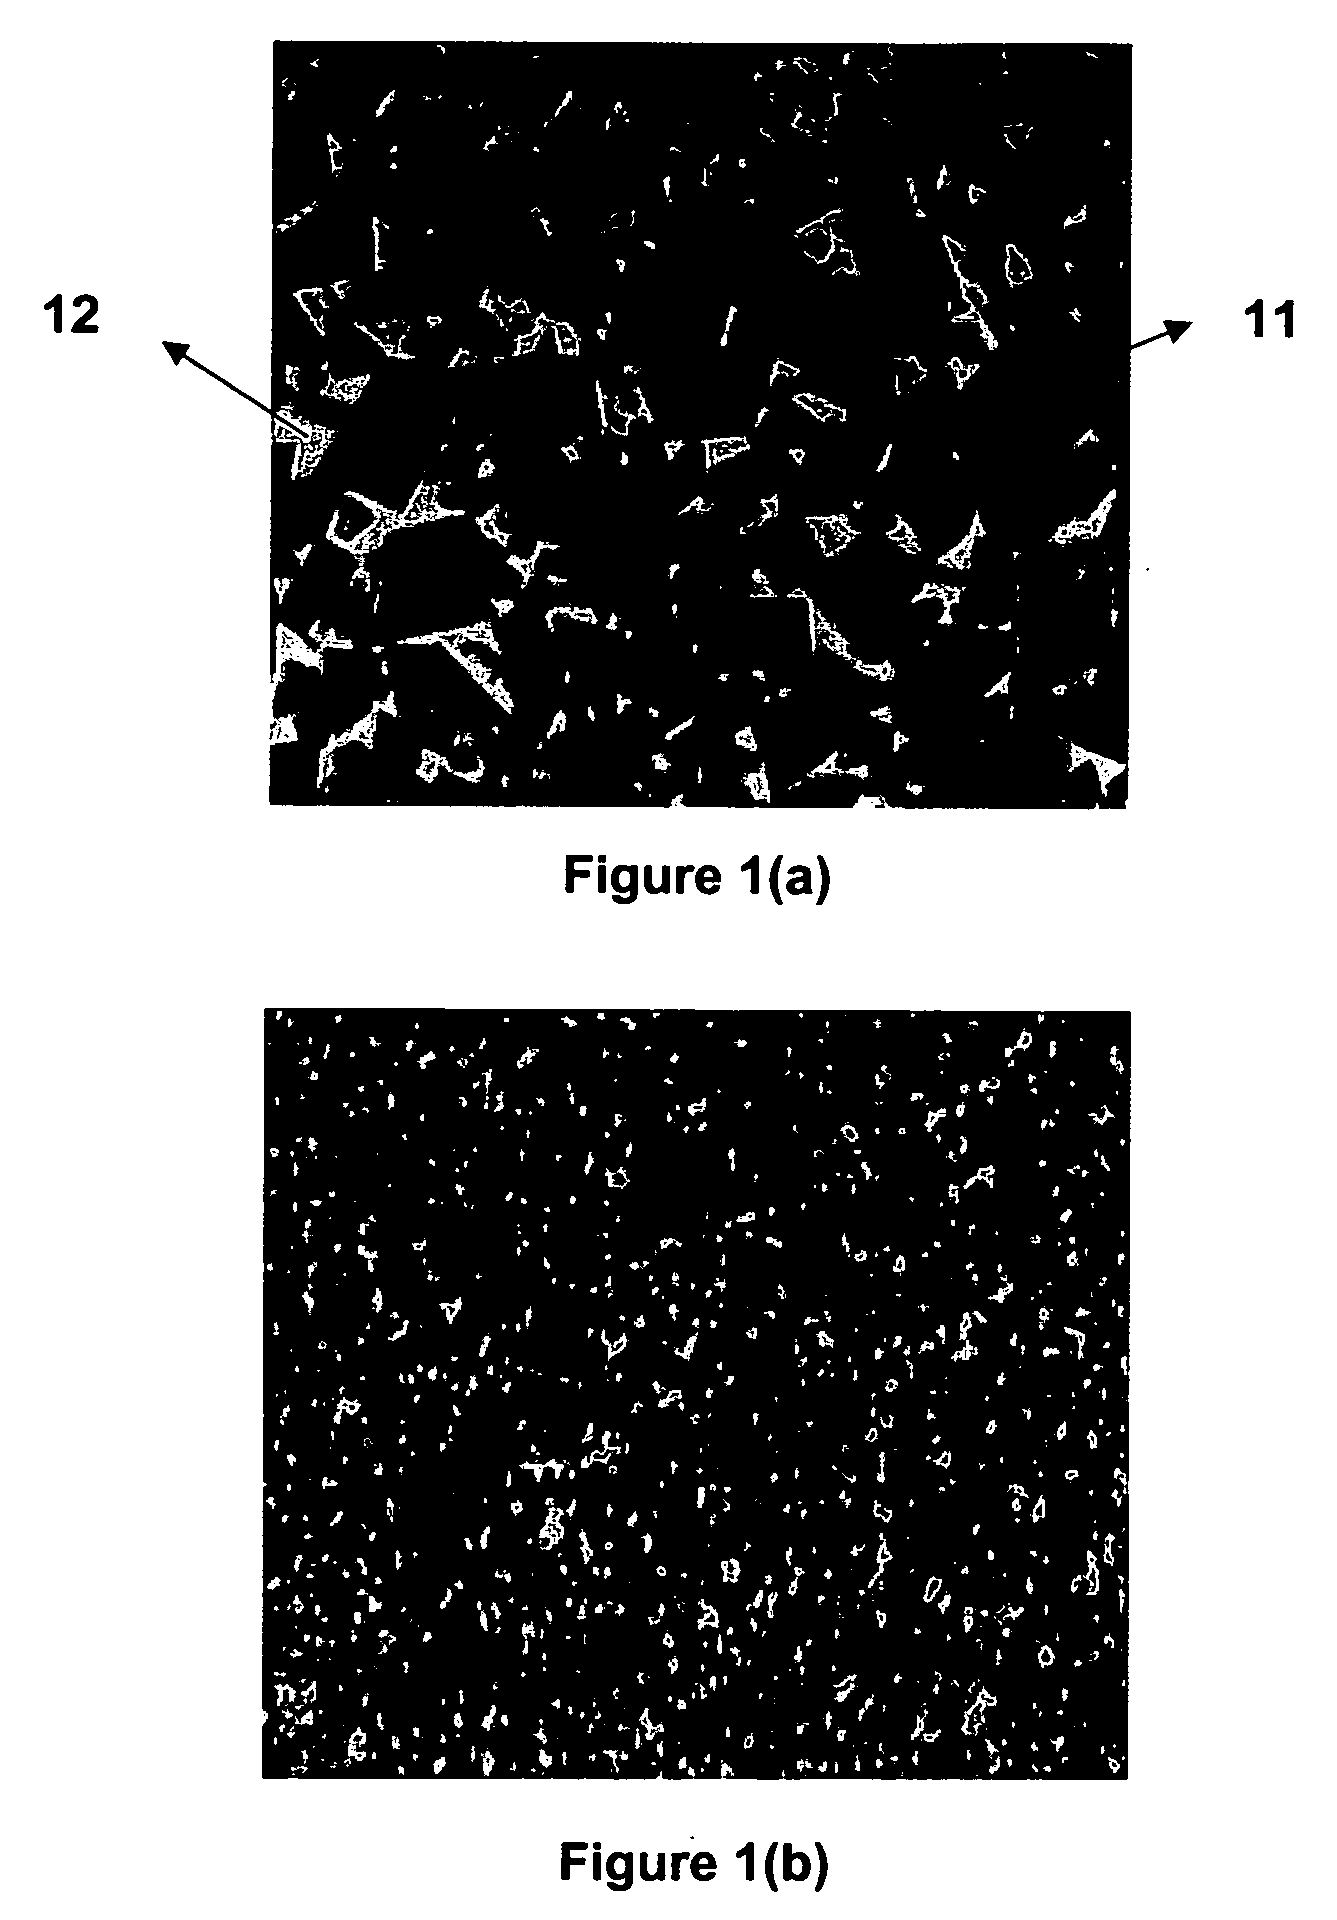 Biocompatible cemented carbide articles and methods of making the same